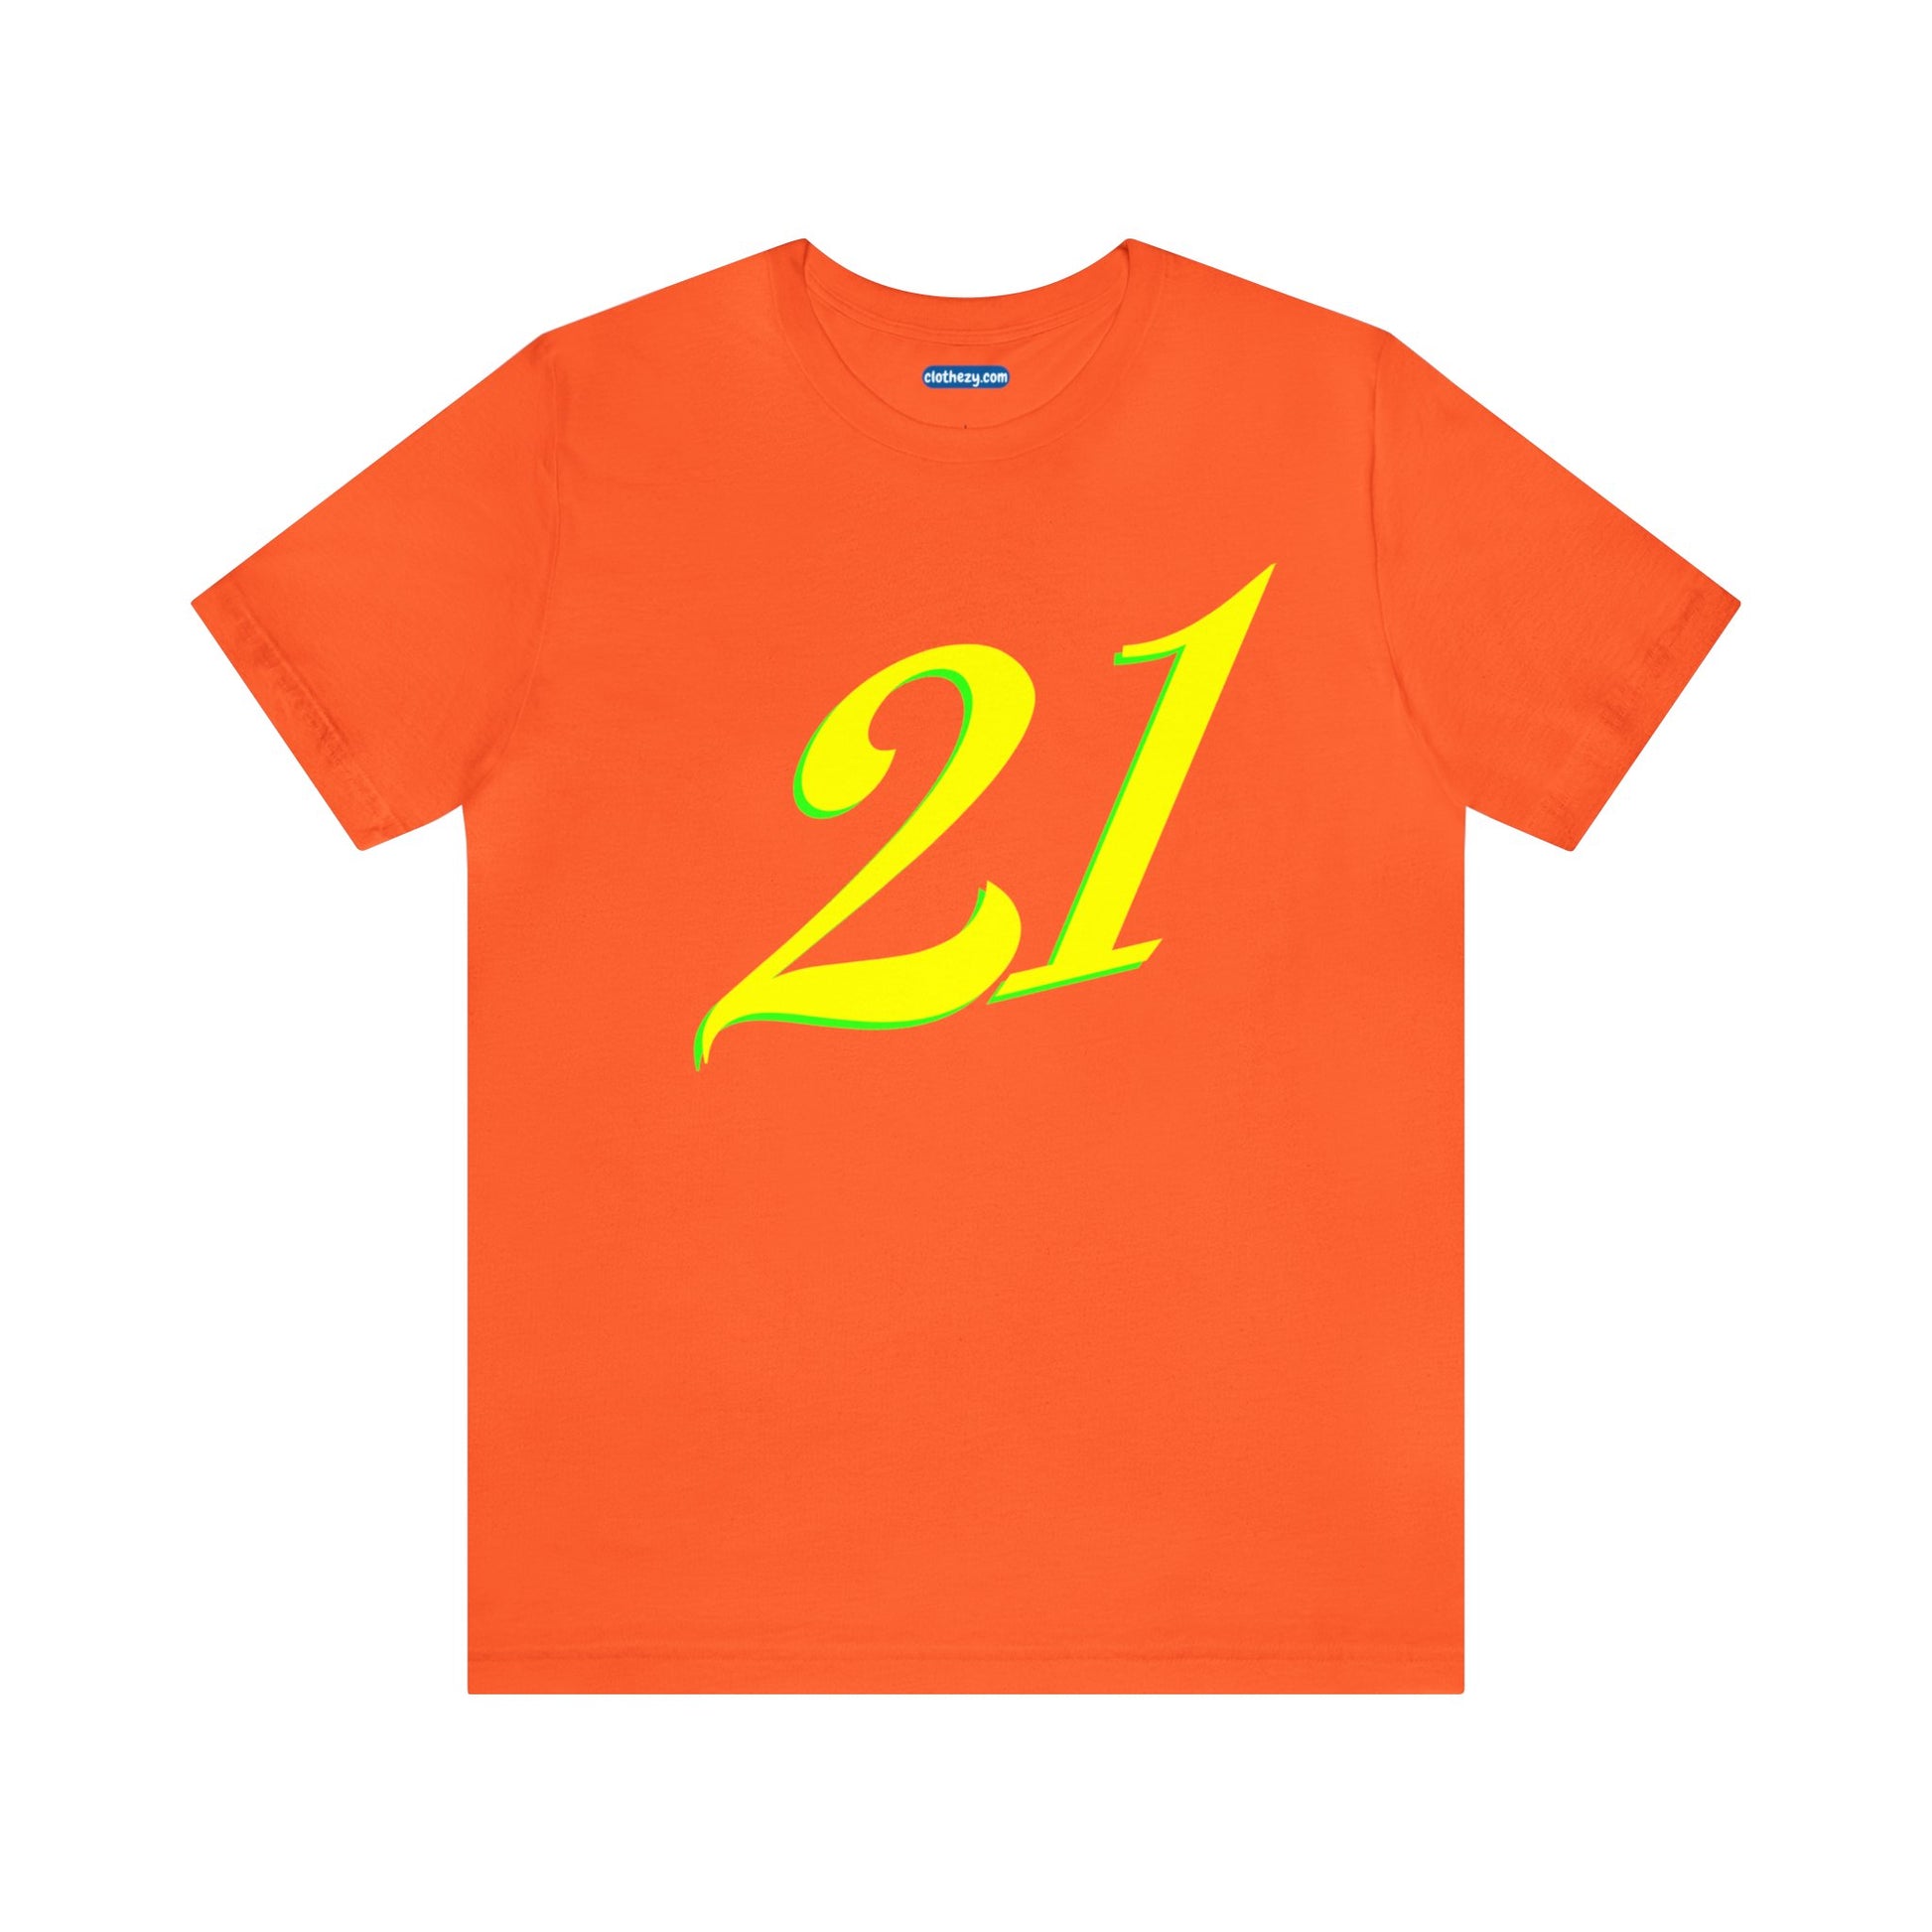 Number 21 Design - Soft Cotton Tee for birthdays and celebrations, Gift for friends and family, Multiple Options by clothezy.com in Pink Size Small - Buy Now